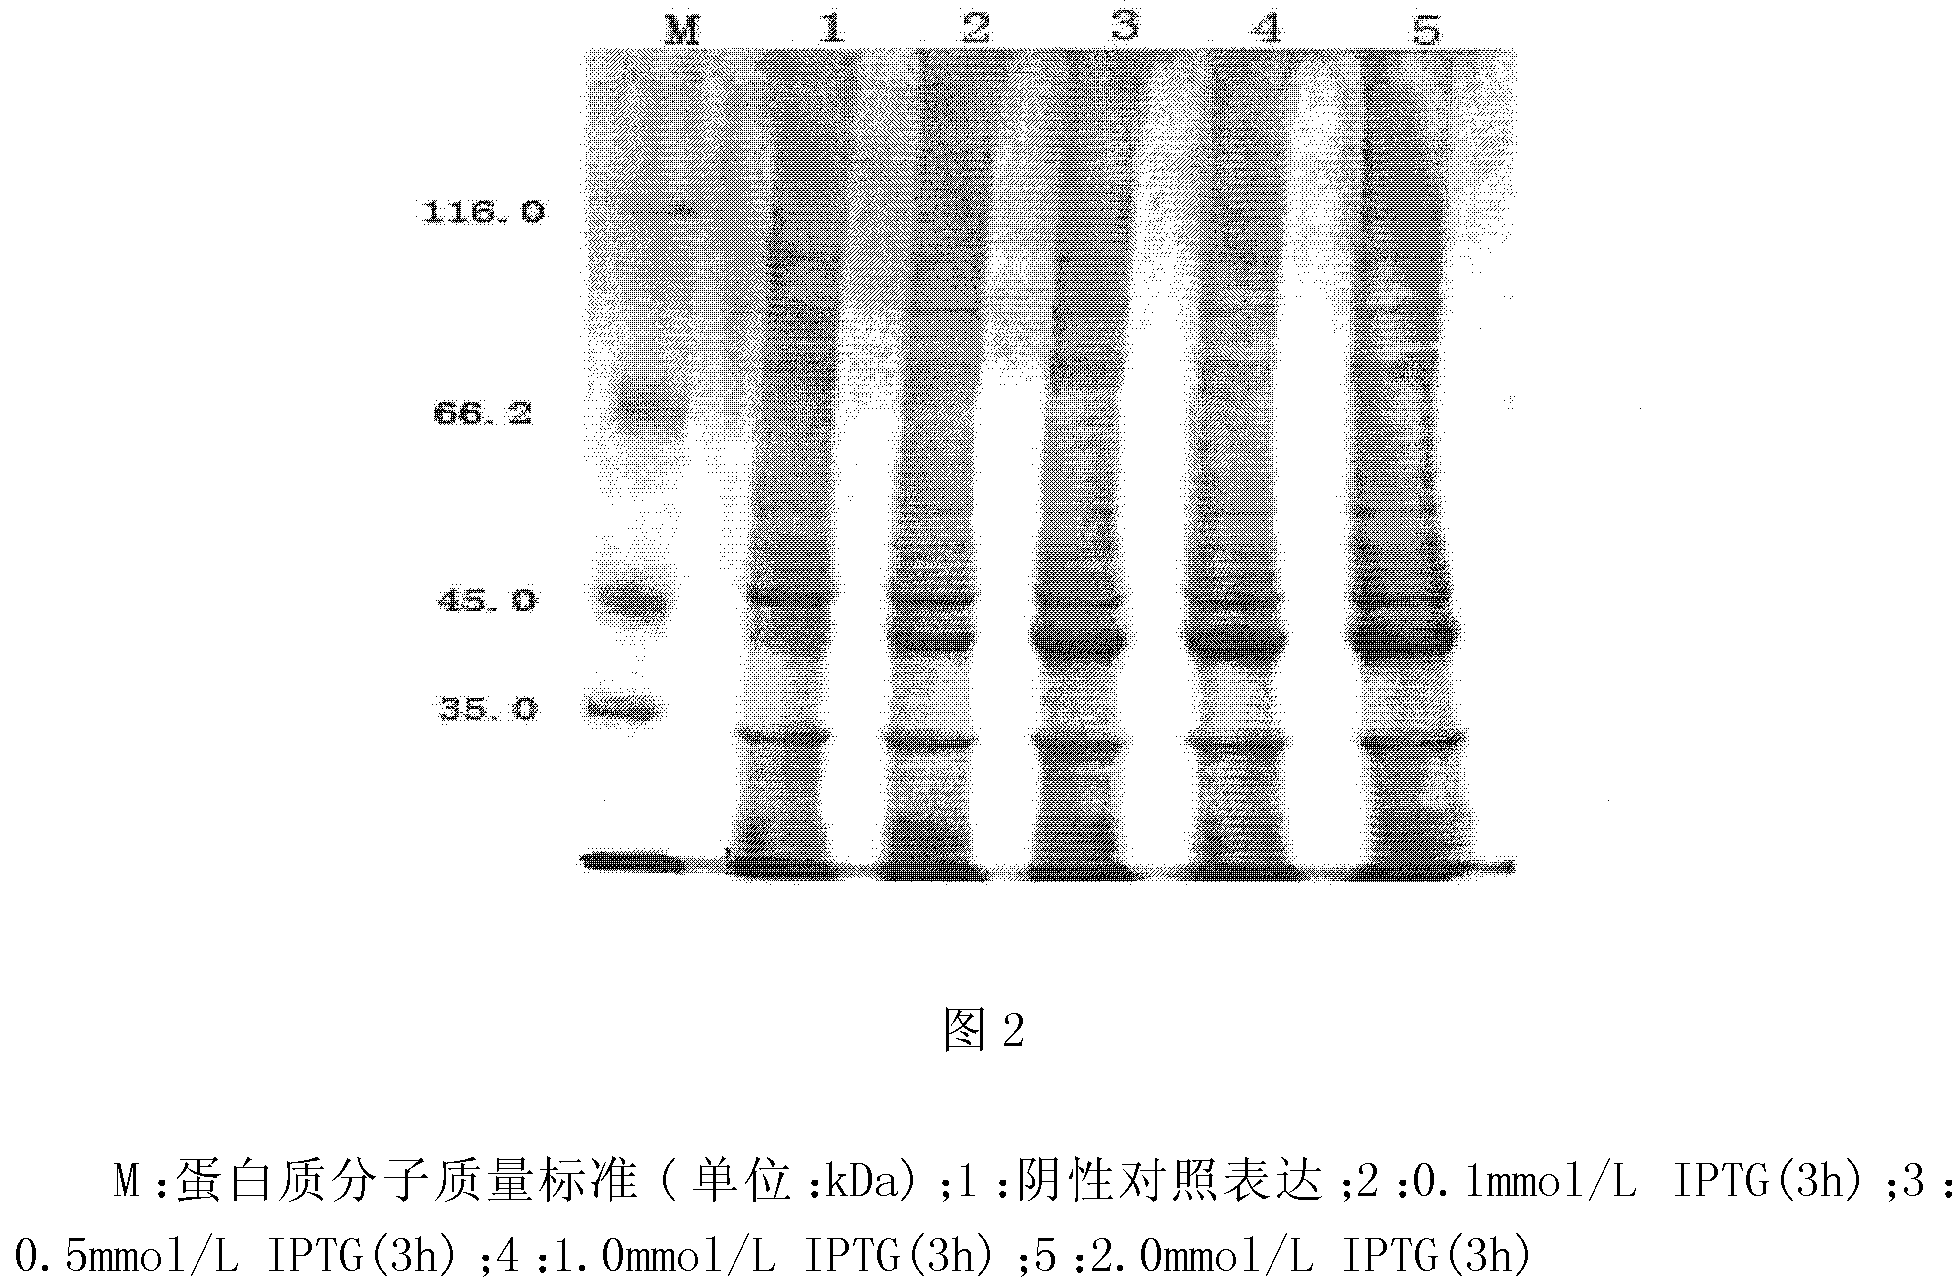 Recombined subunit vaccine of haemaphysalis concinna and preparation method thereof